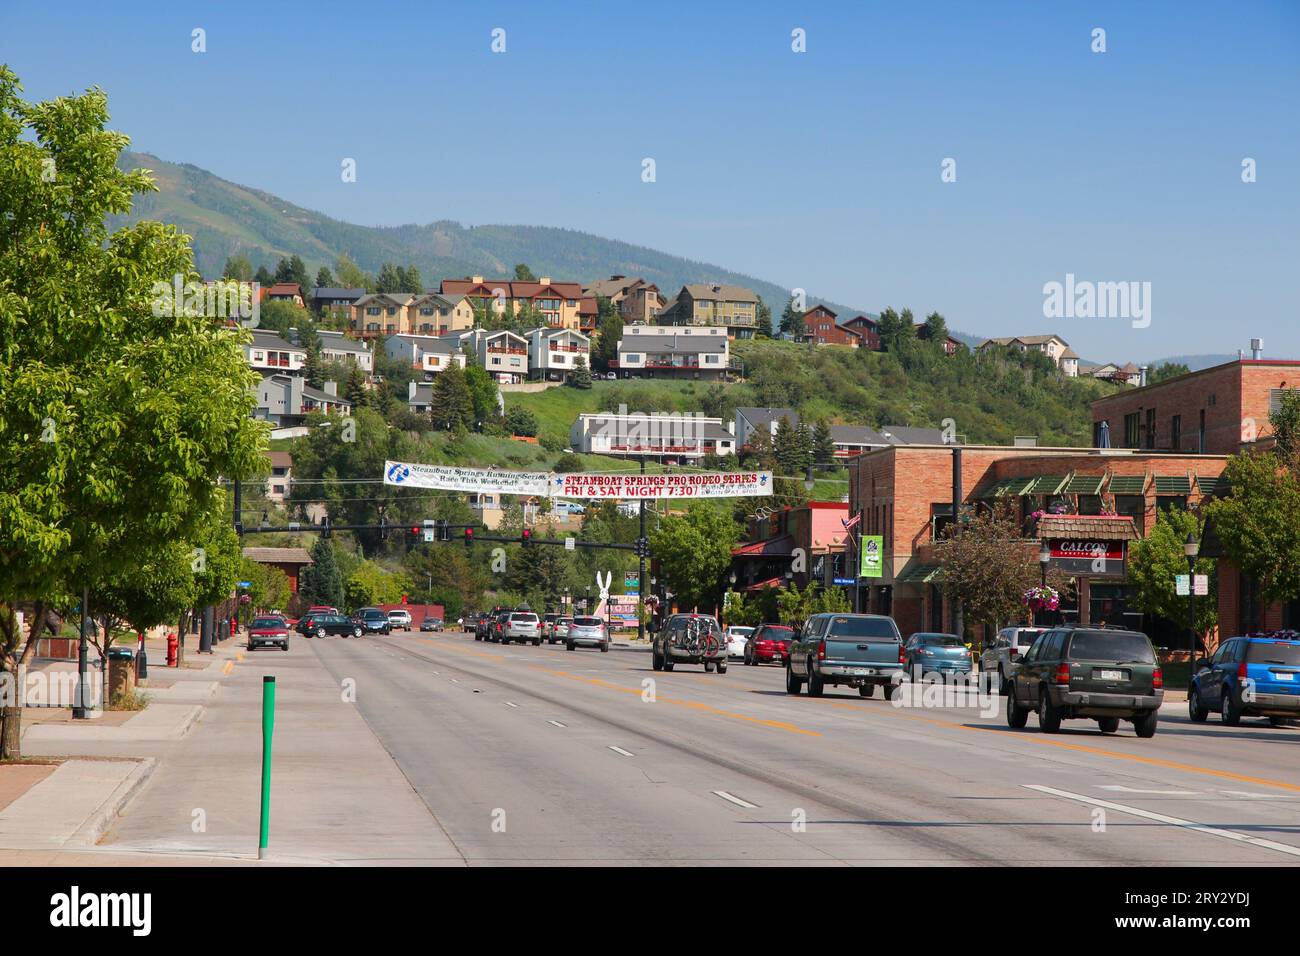 STEAMBOAT SPRINGS, COLORADO - JUNE 19, 2013: Main street in Steamboat Springs, Colorado. Steamboat Springs is a famous tourist and ski resort in Color Stock Photo